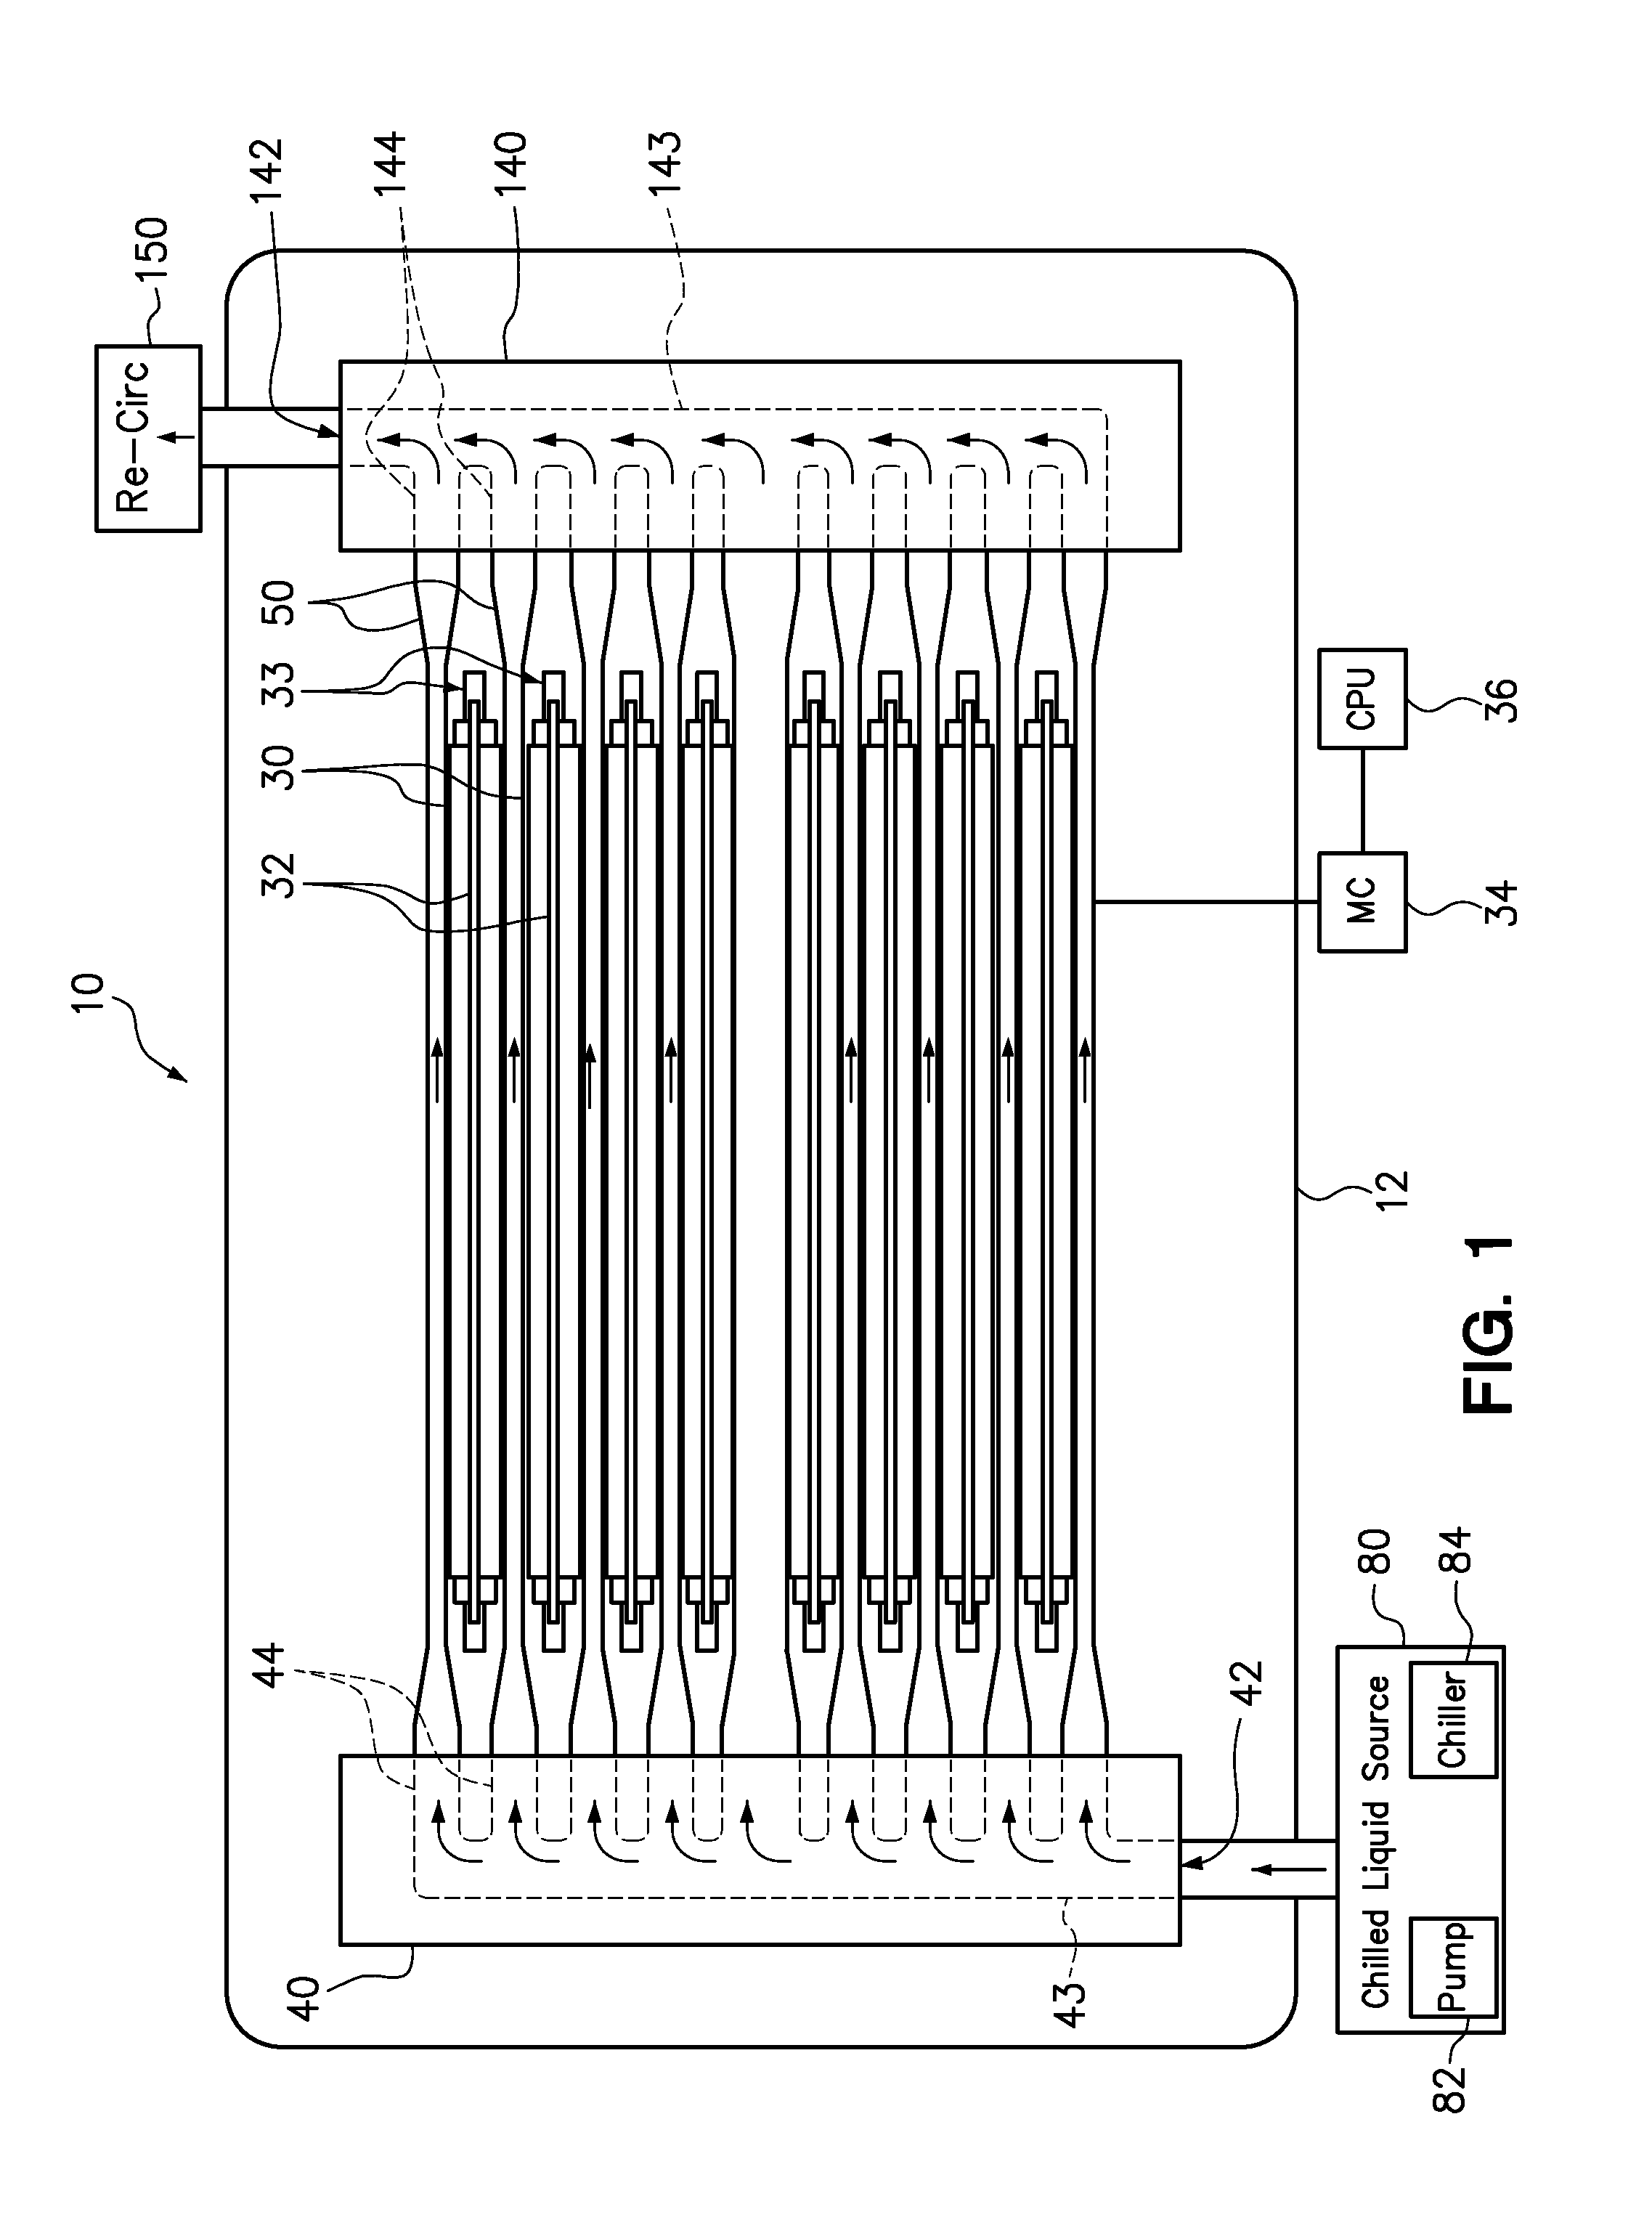 Liquid-cooling memory modules with liquid flow pipes between memory module sockets